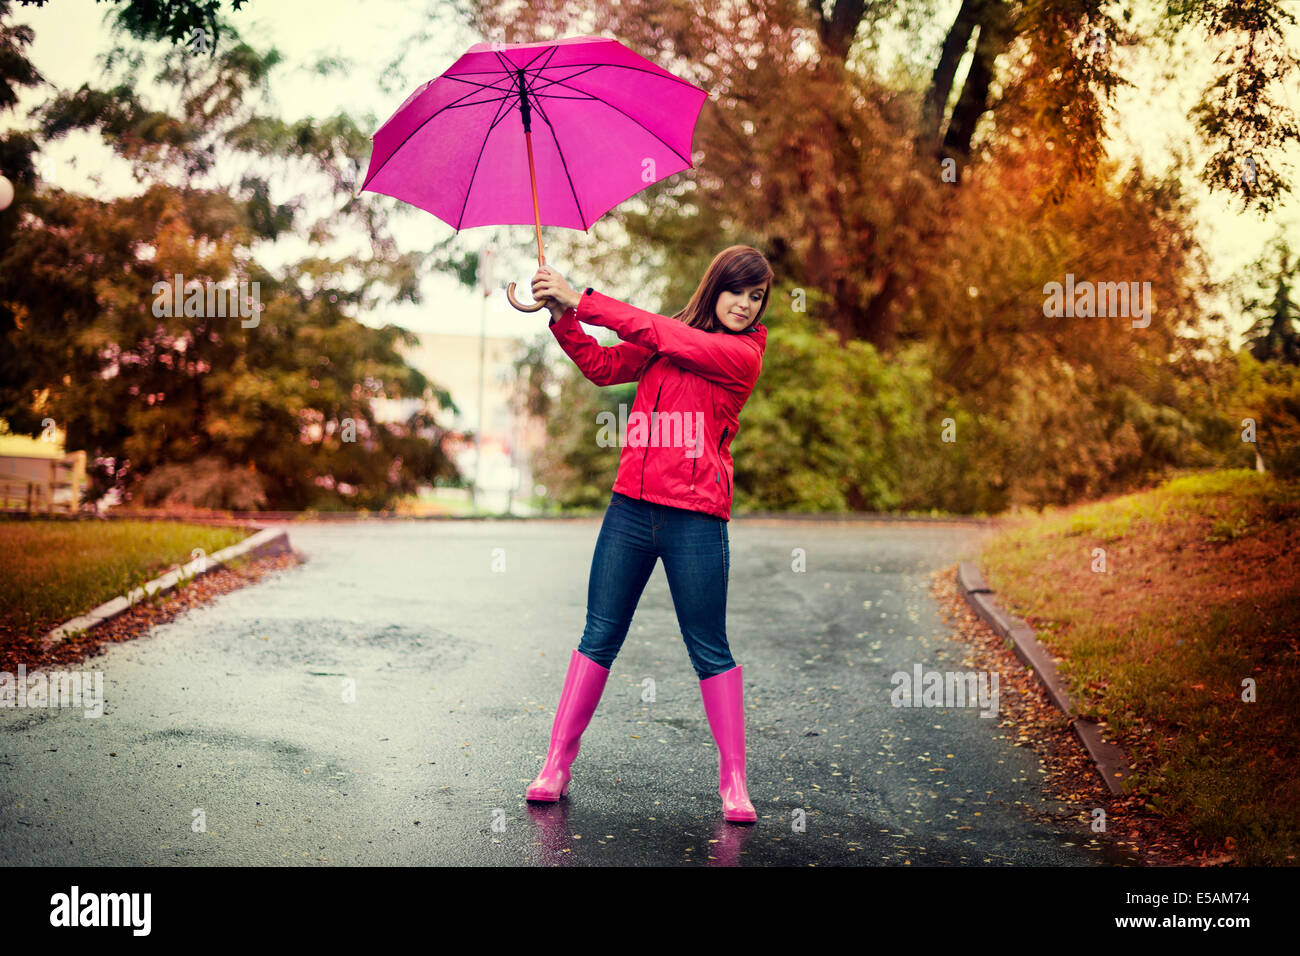 Young woman holding pink umbrella in a park, Debica, Poland Stock Photo